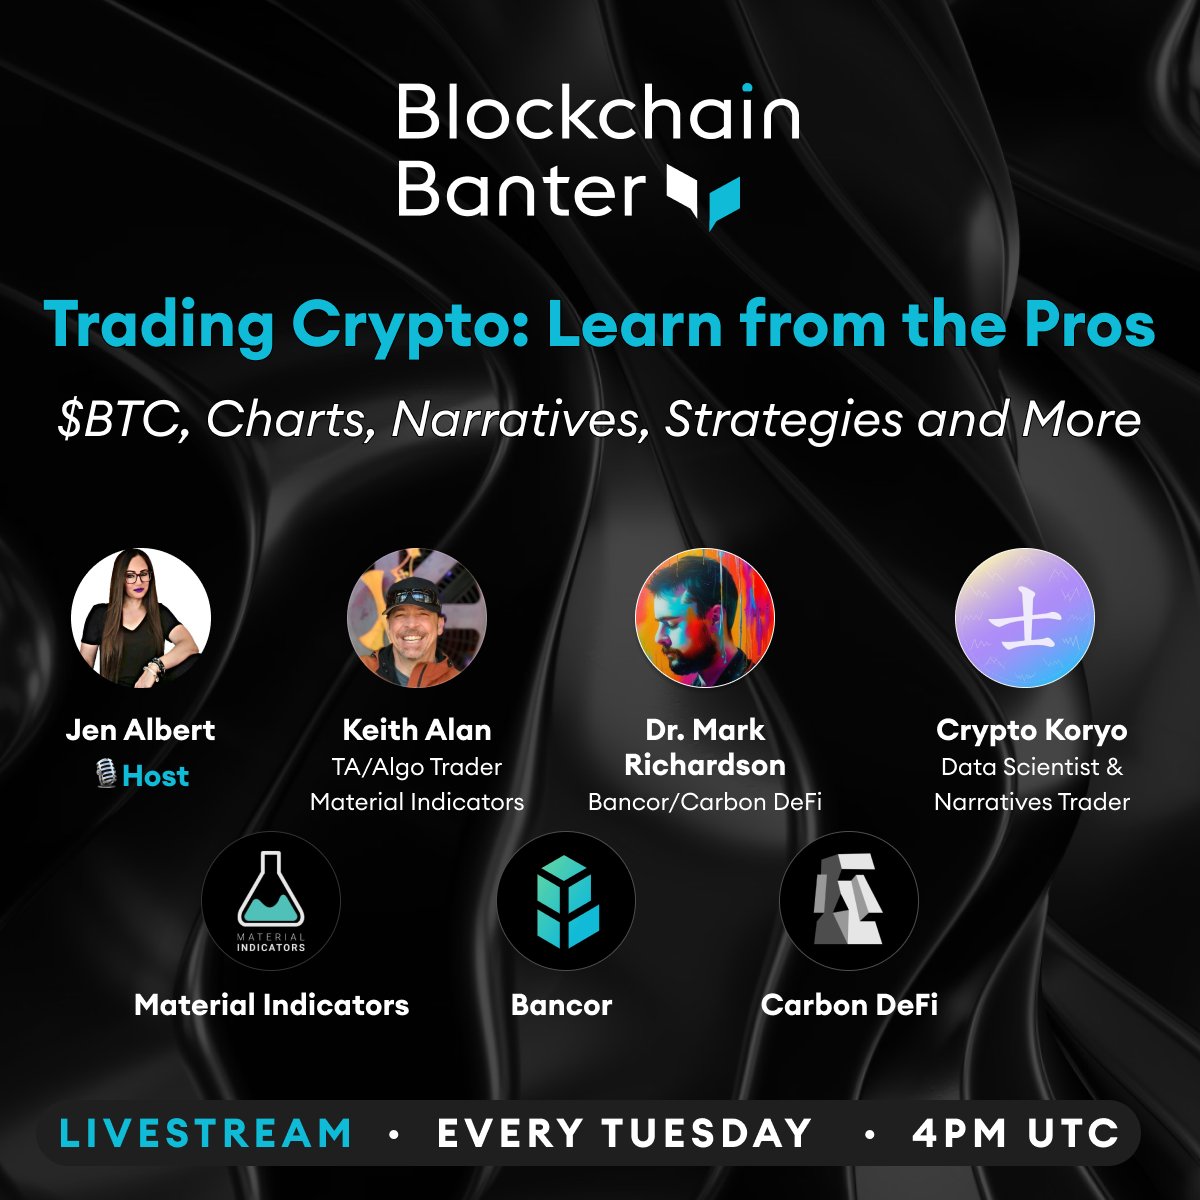 Get ready for some serious insights on Tuesday's 'Blockchain Banter: Trading Crypto' with @CryptoKoryo, @KAProductions of @MI_Algos, and @MBRichardson87 of @Bancor and @CarbonDeFixyz! Join the live stream, learn from the pros, and take your trading to the next level 💯